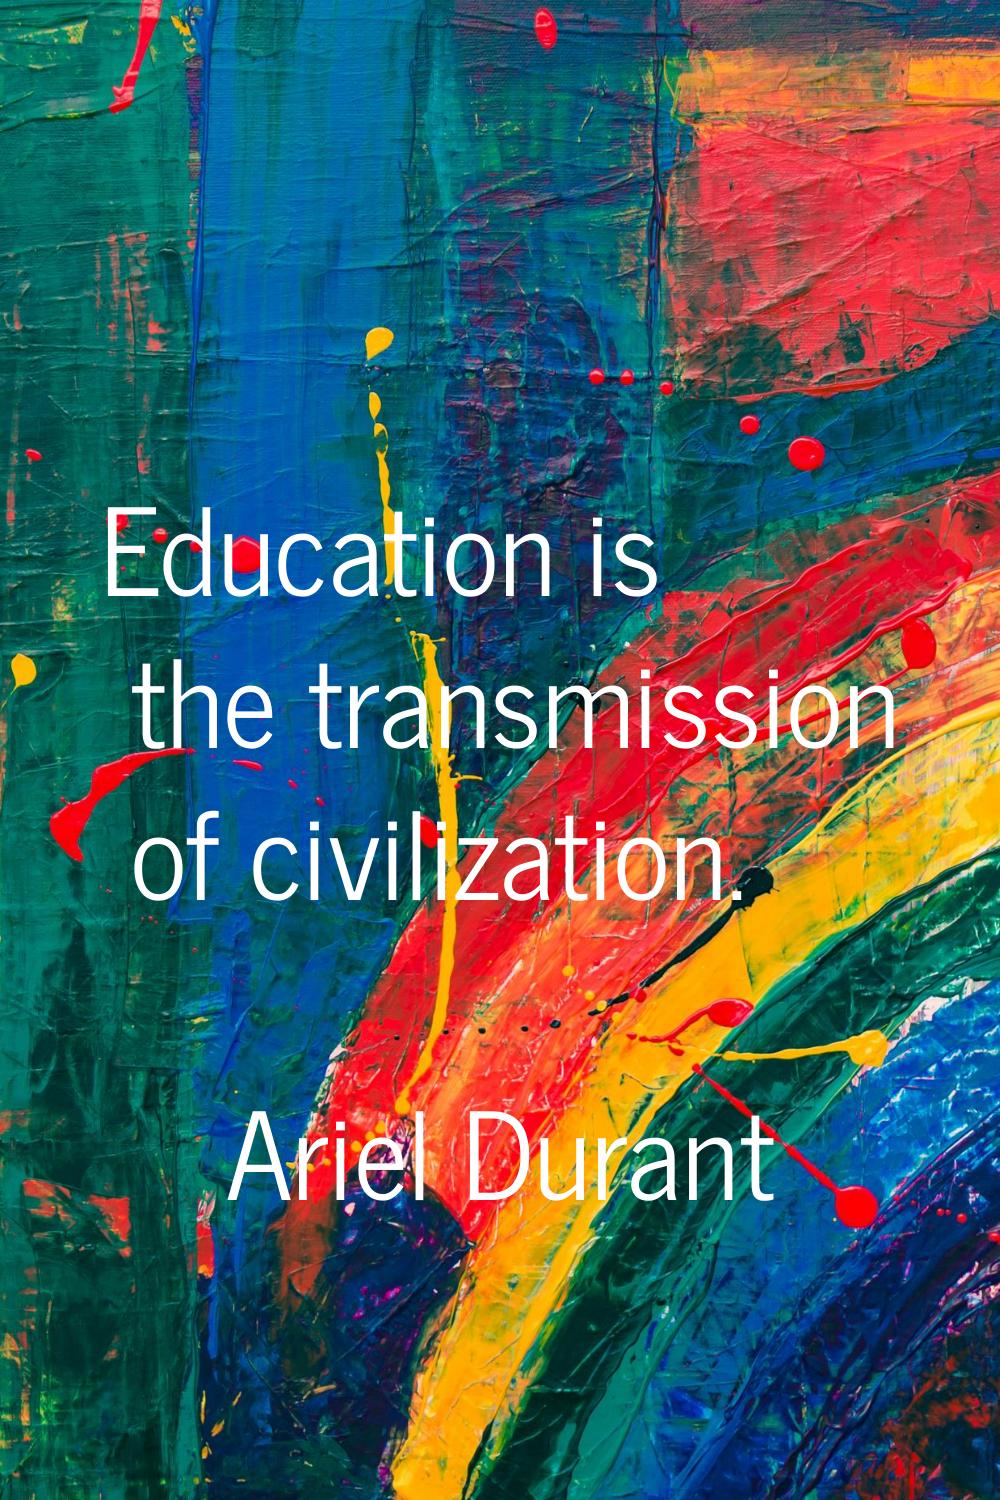 Education is the transmission of civilization.